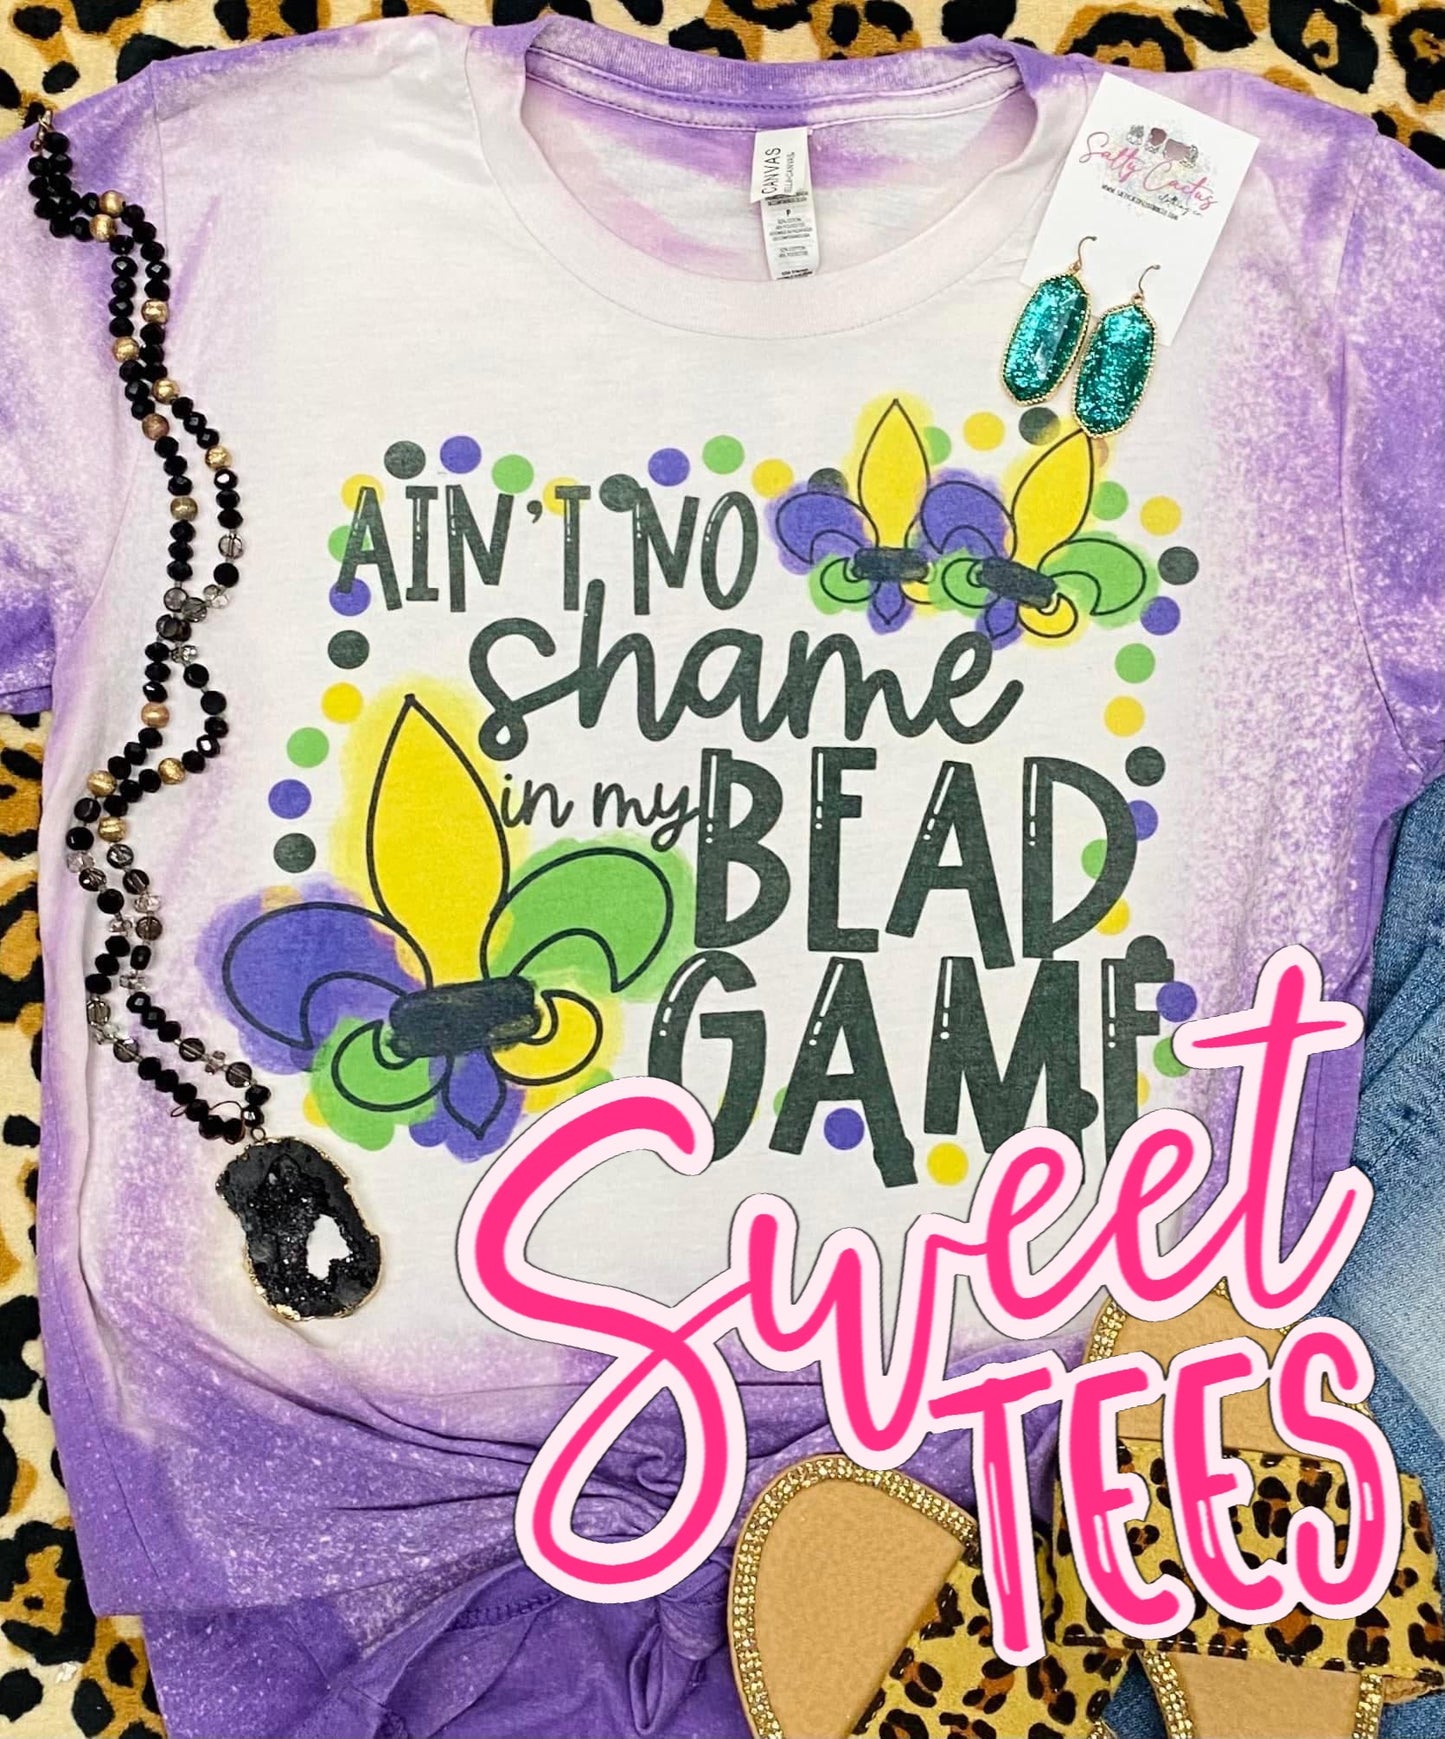 No Shame in my Bead Game tee